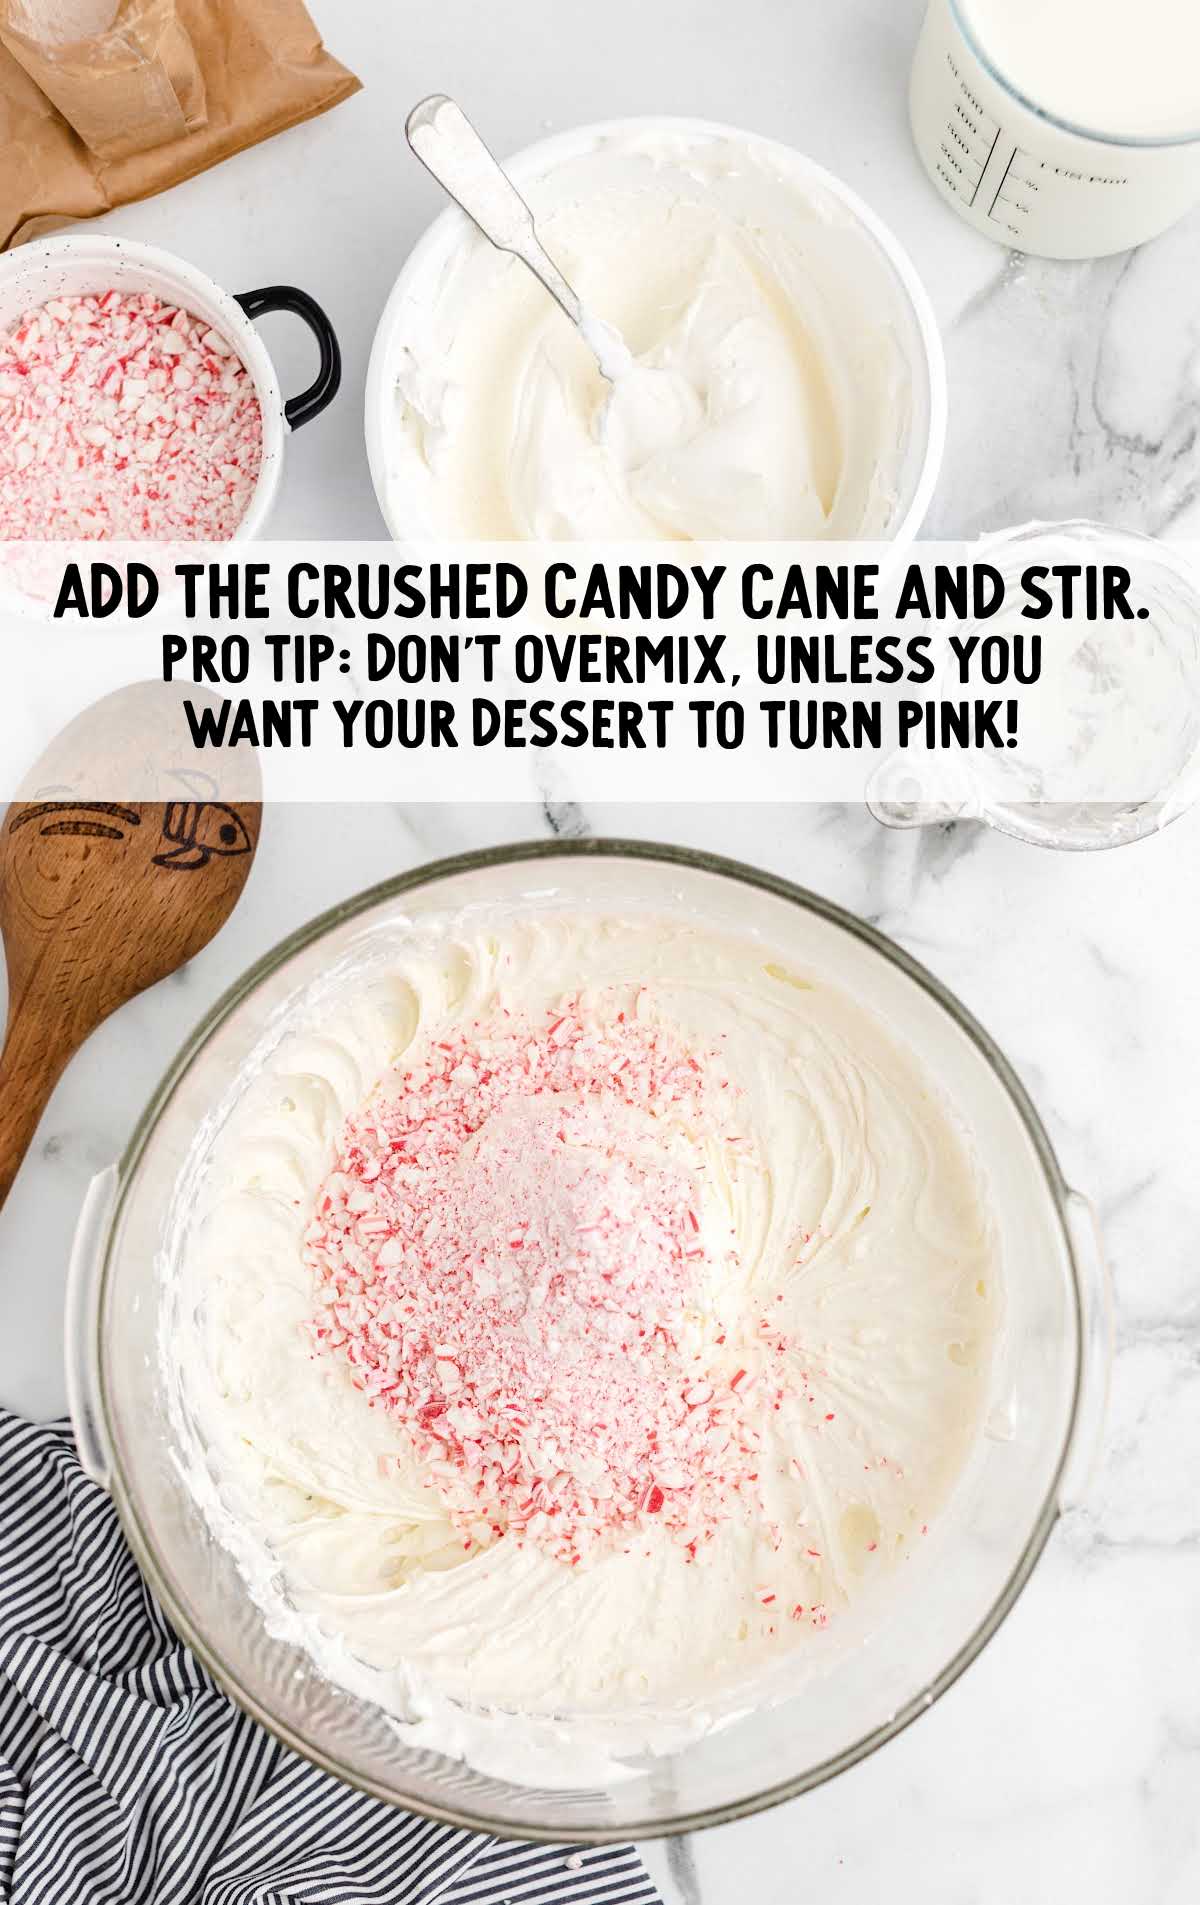 crushed candy canes added to the sugar mixture in a bowl